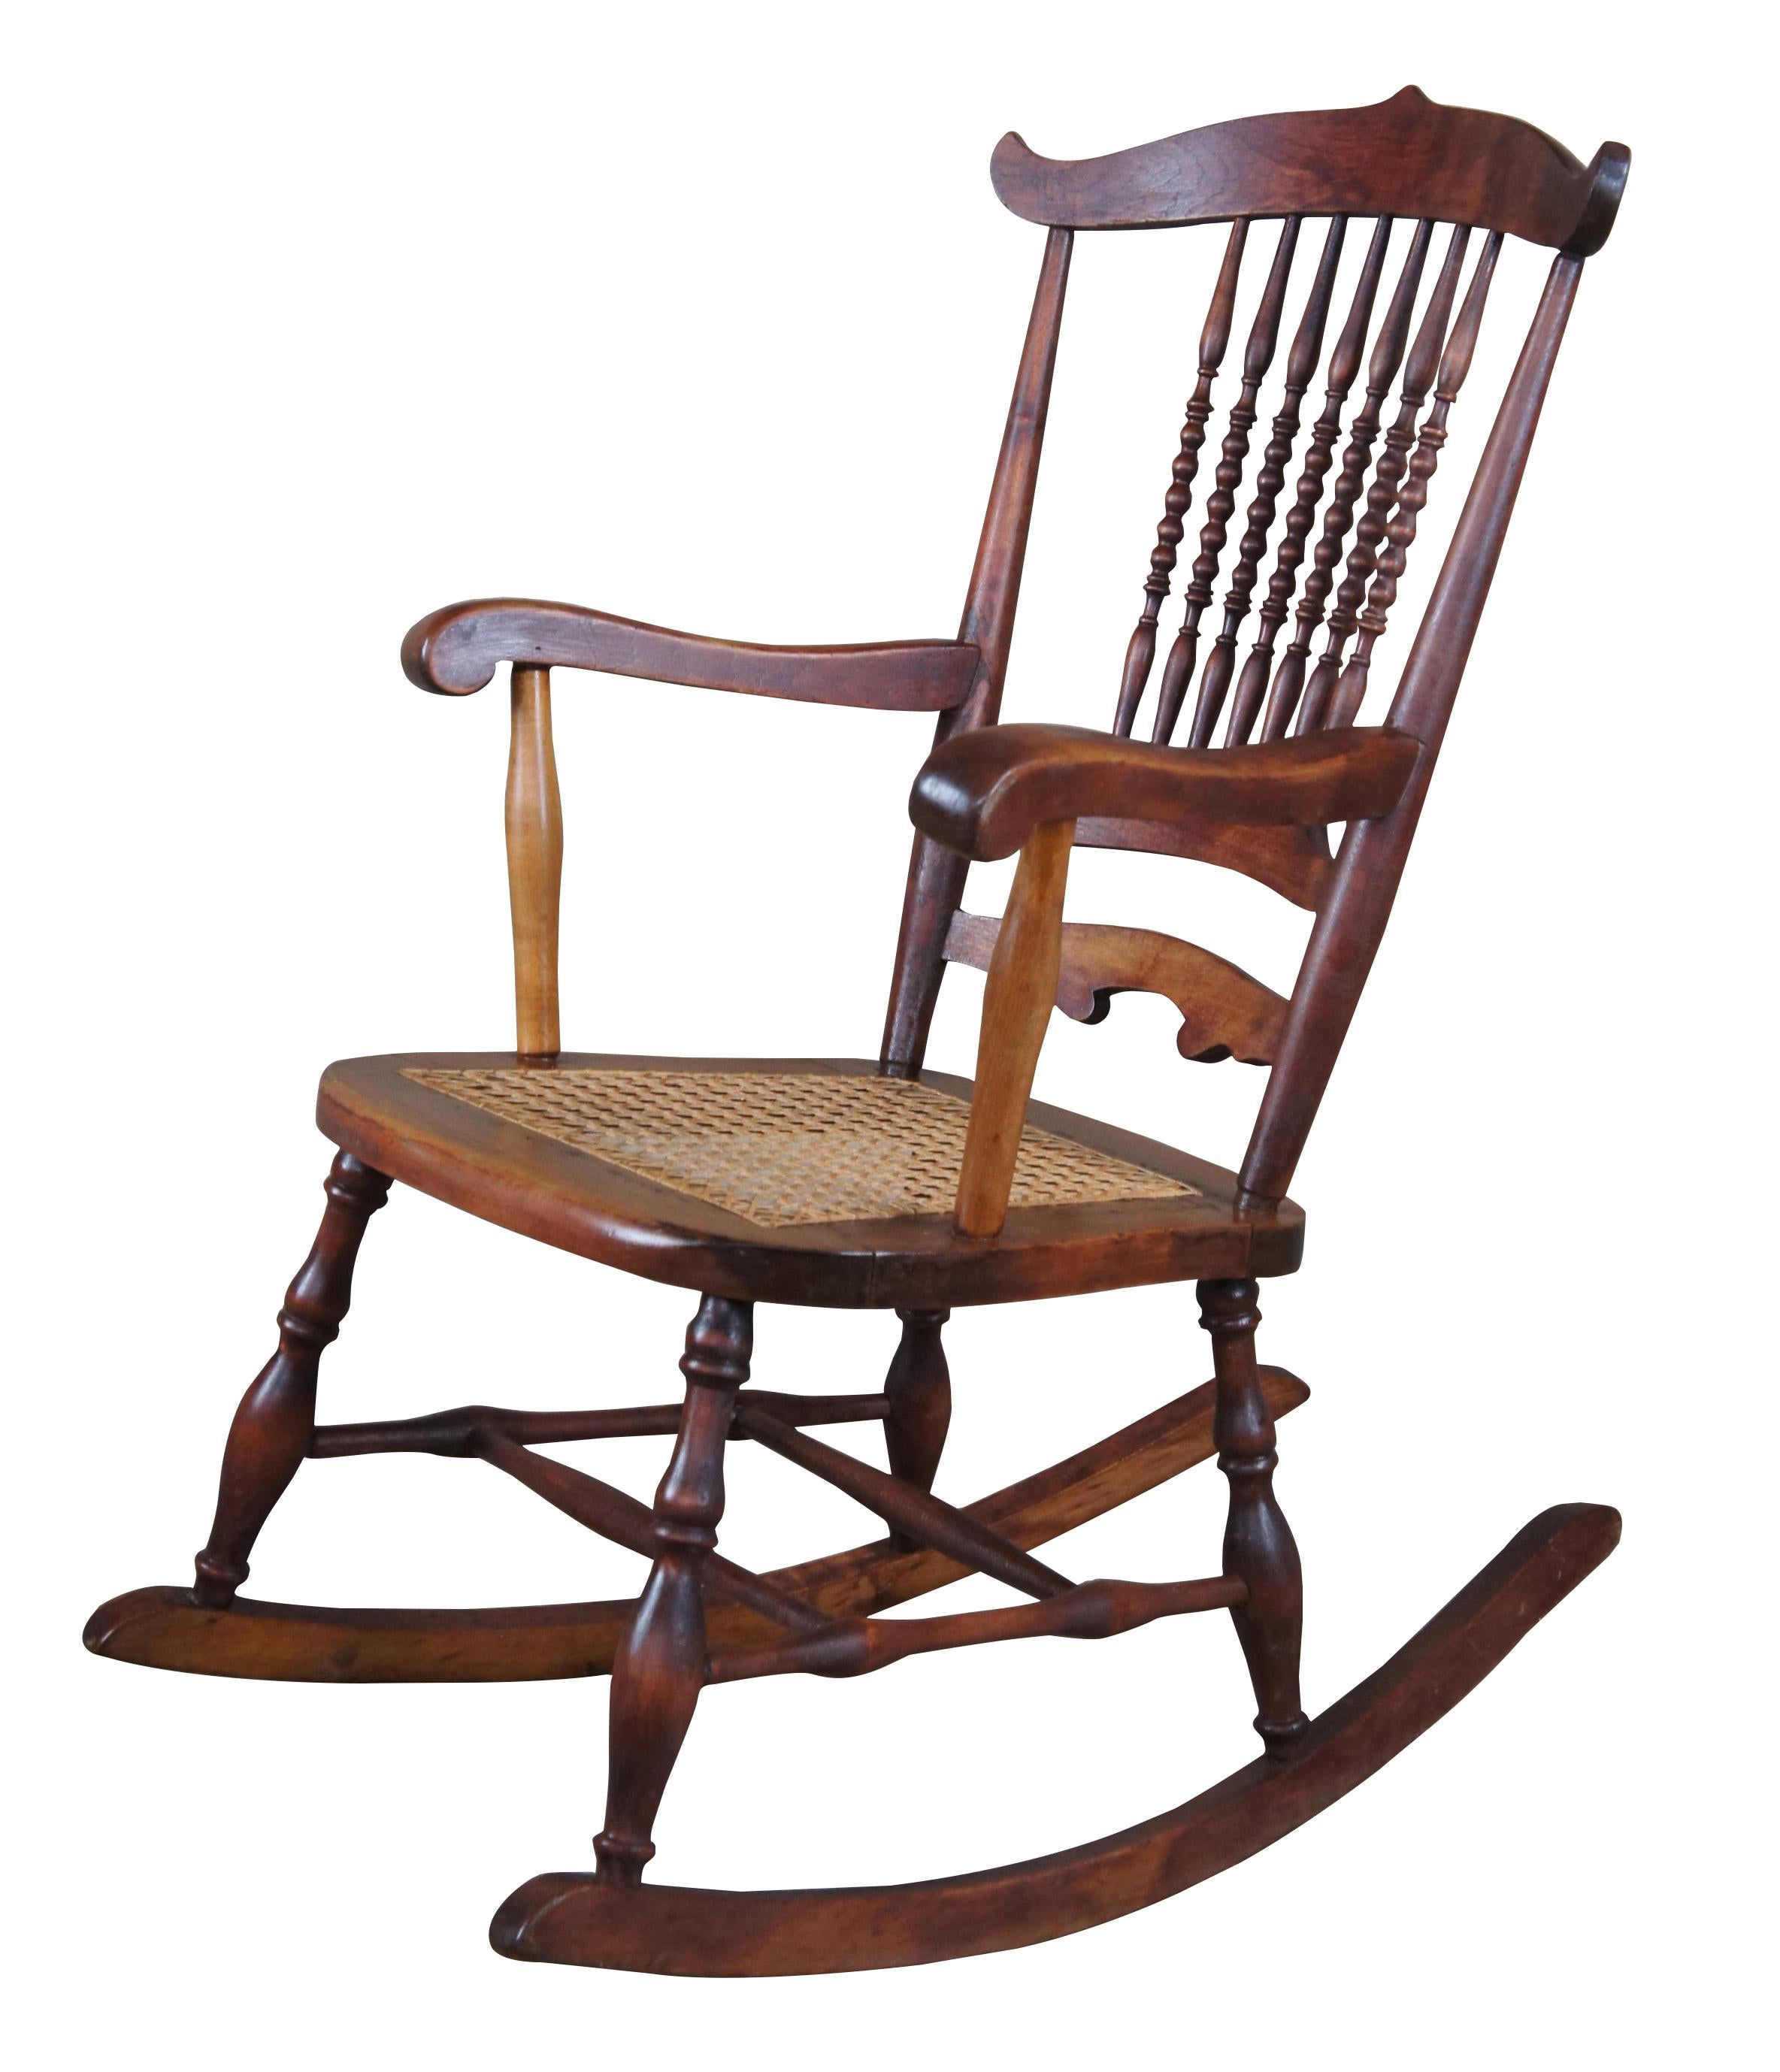 Country Antique Early 20th Century Maple Farmhouse Spindleback Rocking Chair Cane Seat